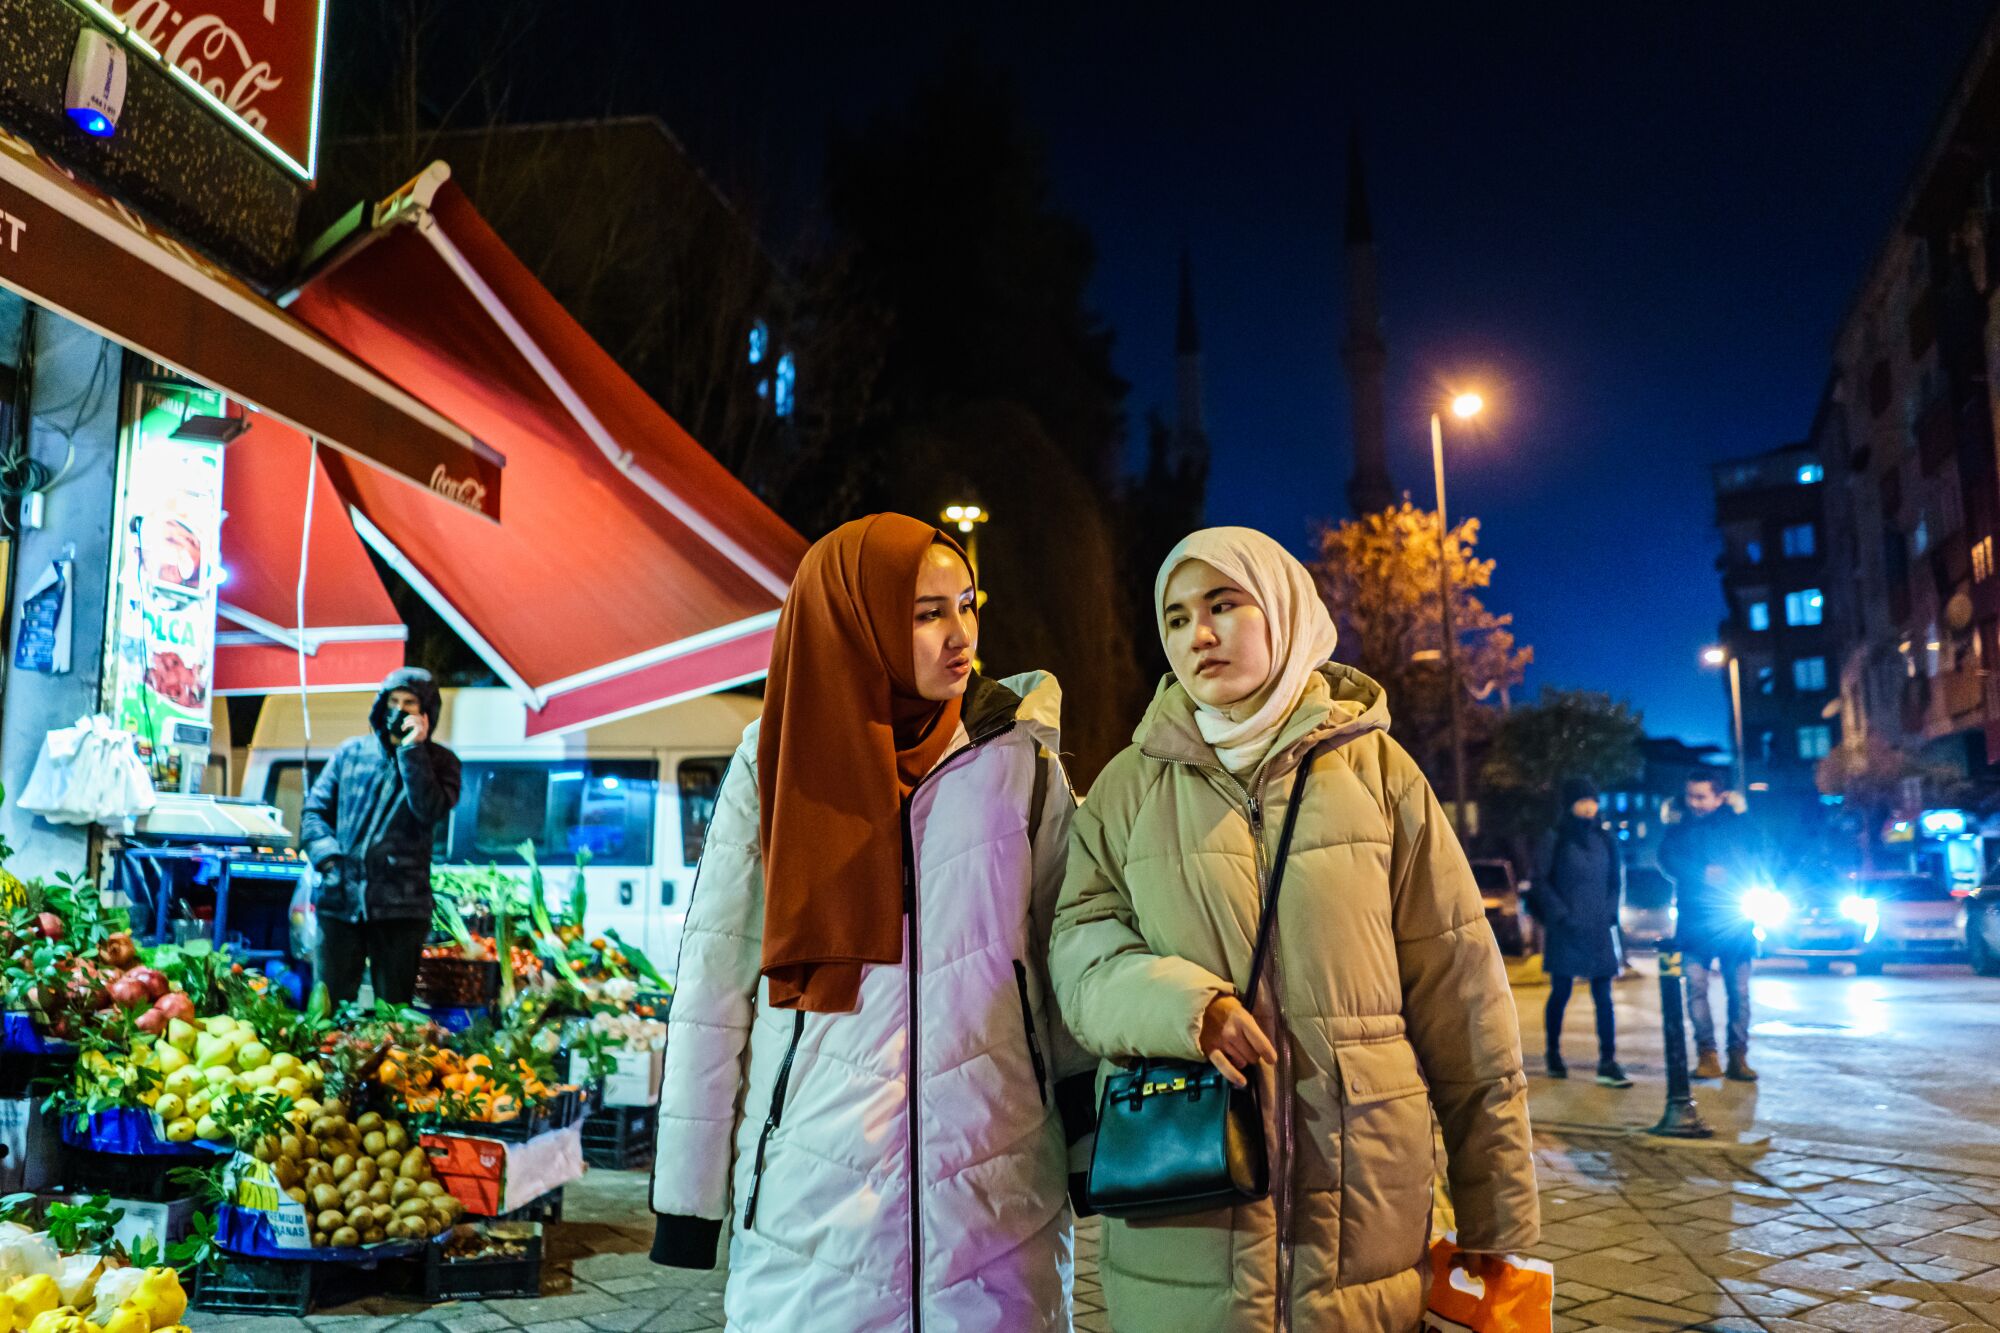 Two young women in head scarves walk by a produce stand.